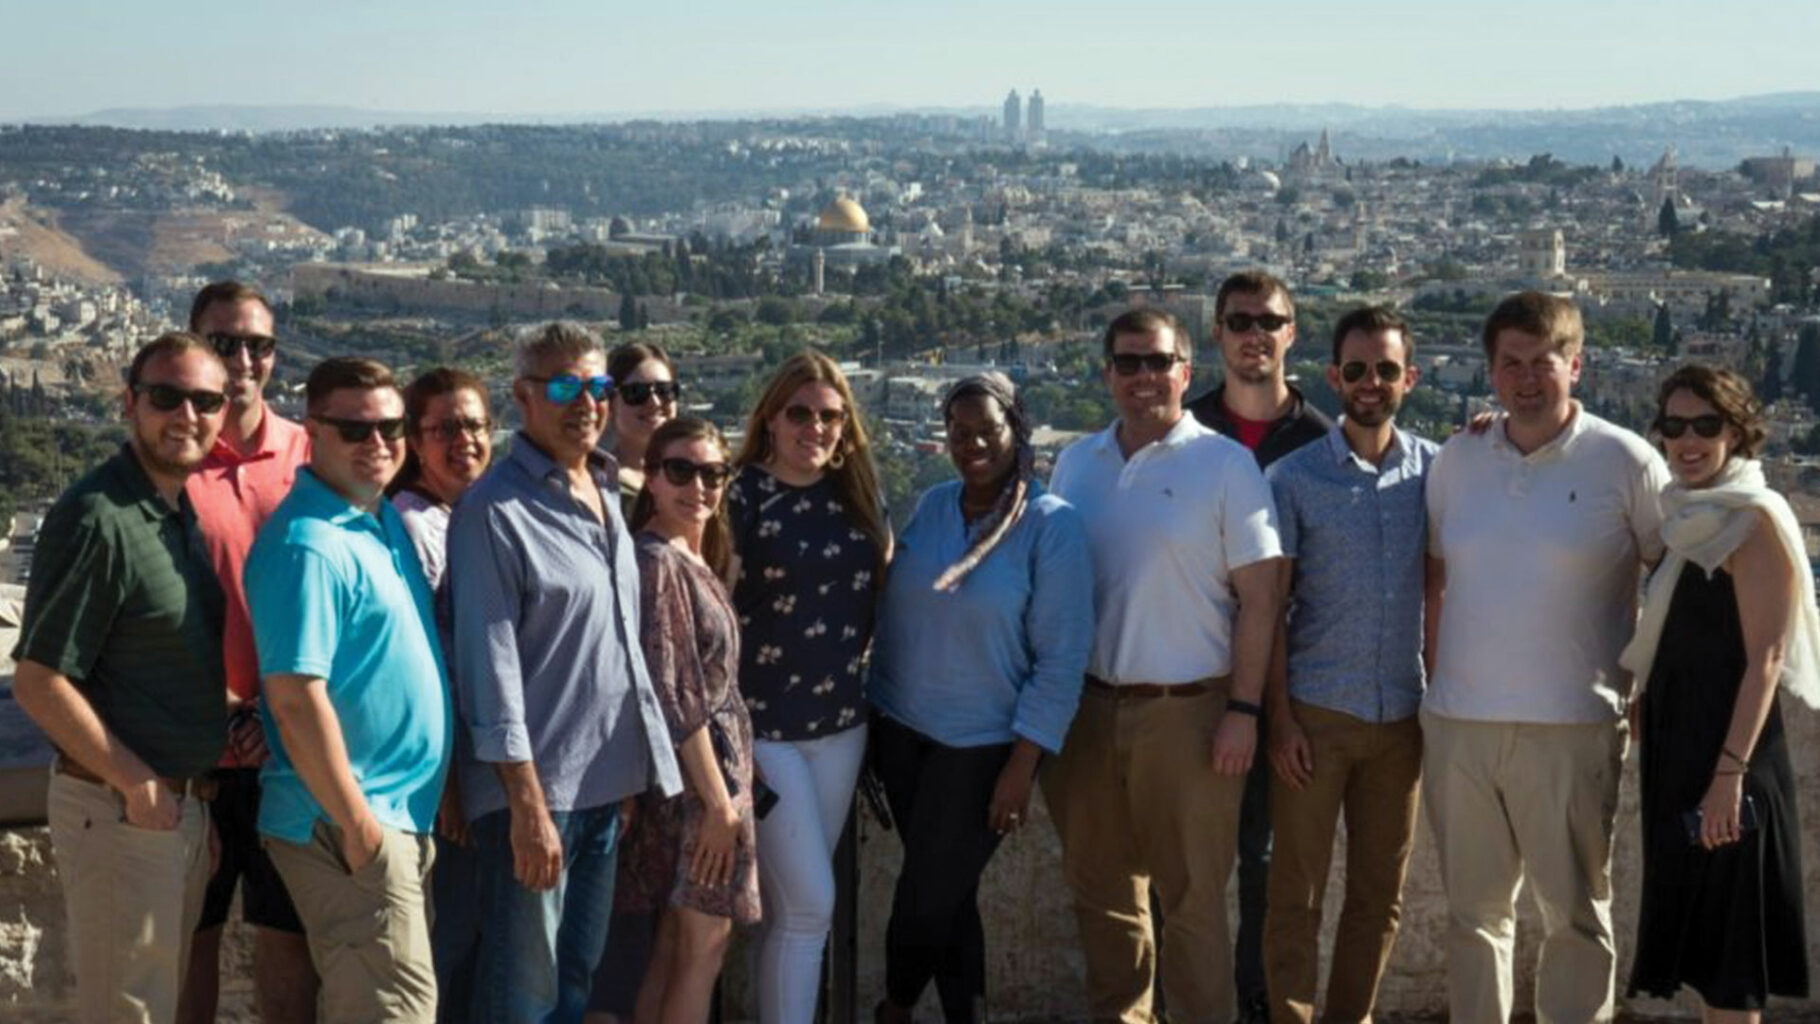 INTELLI-TOUR ™ by ITME is a series of planned OUTDOOR BRIEFINGS in different locations: Cities & Villages, Galilee's Valleys, Seashores, Negev Desert, Golan Heights, as well as all Borders of Israel: Lebanon, Syria, Jordan, Egypt, West Bank & Gaza...